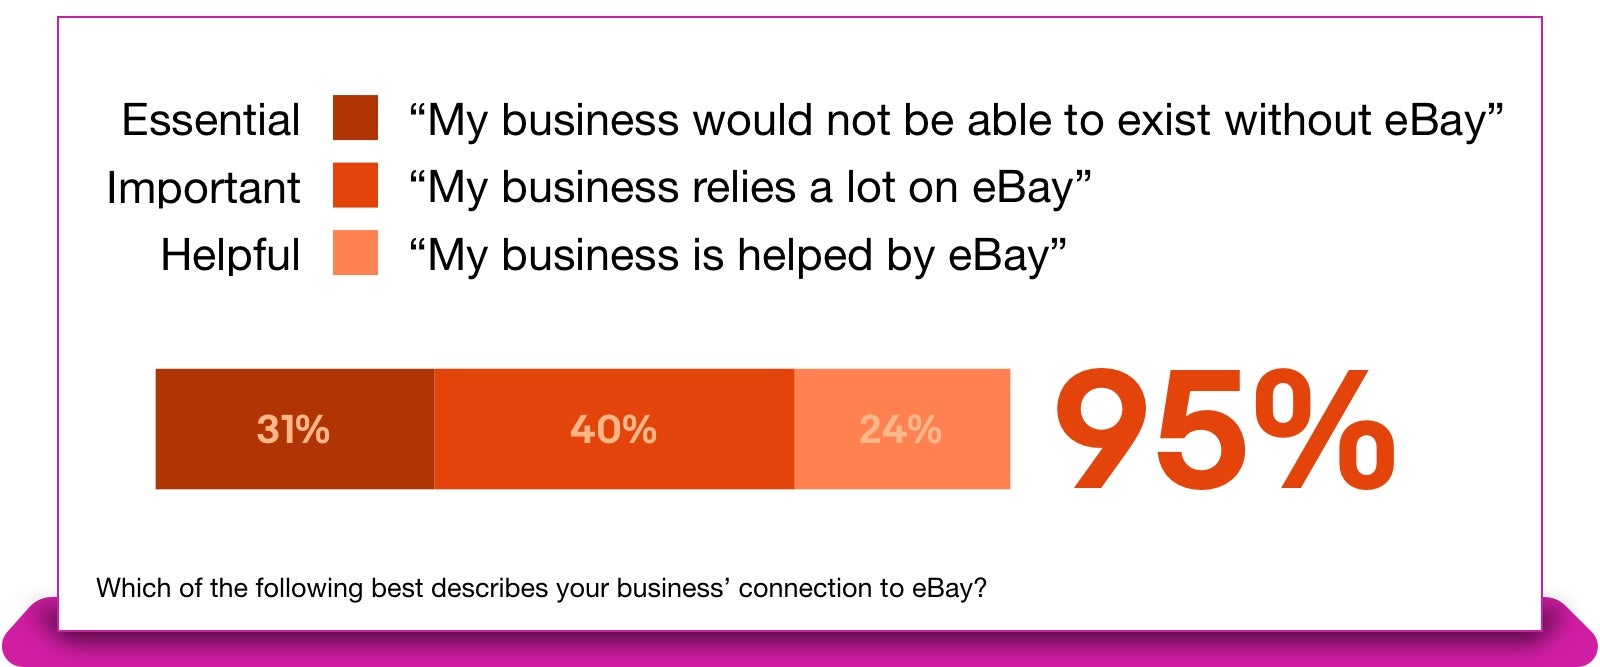 Business connection to eBay